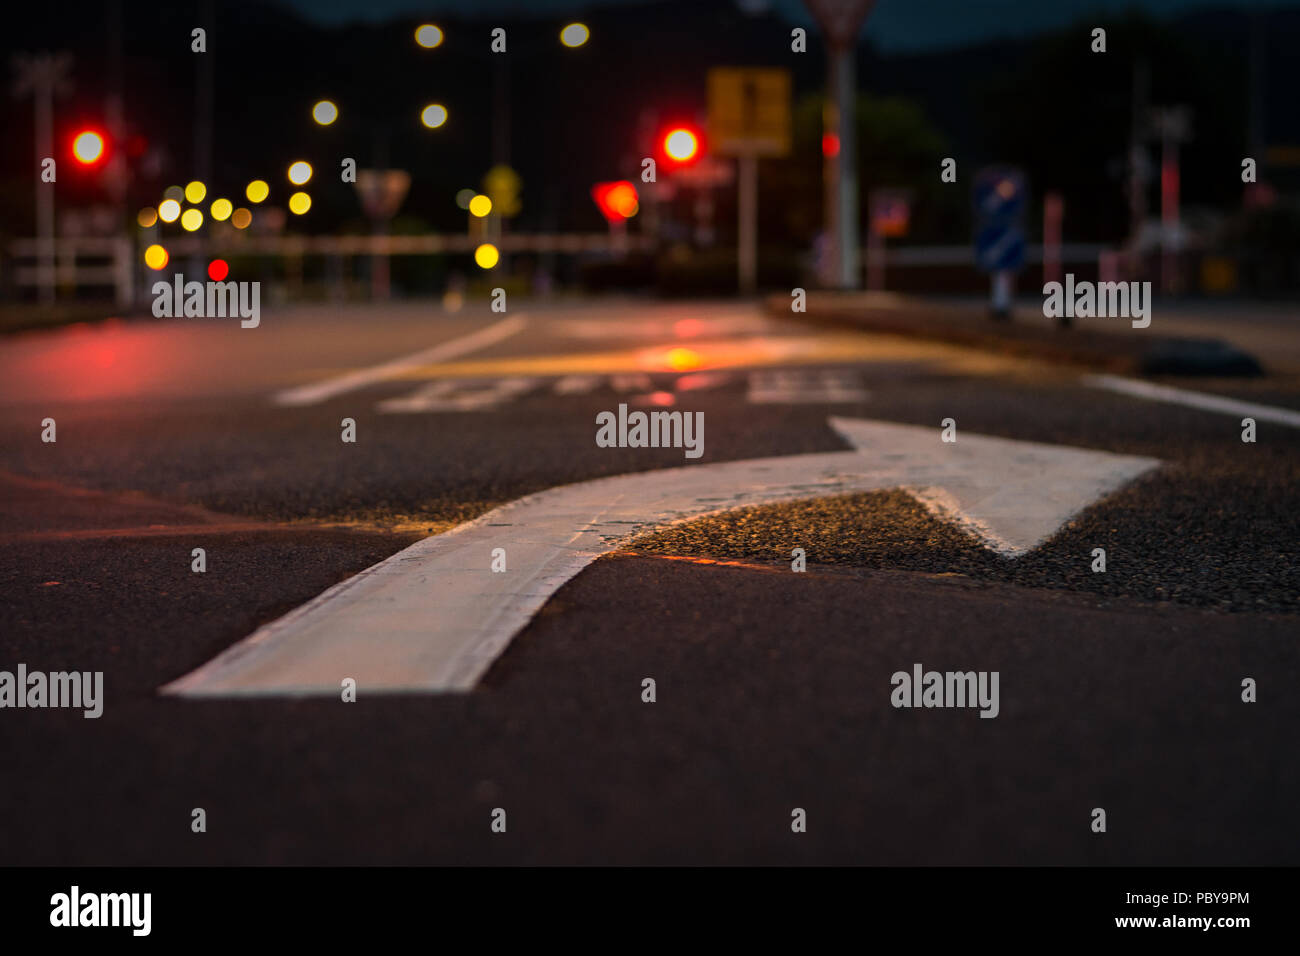 Low angle view of a right turn arrow painted on the road with a railway crossing in the background Stock Photo